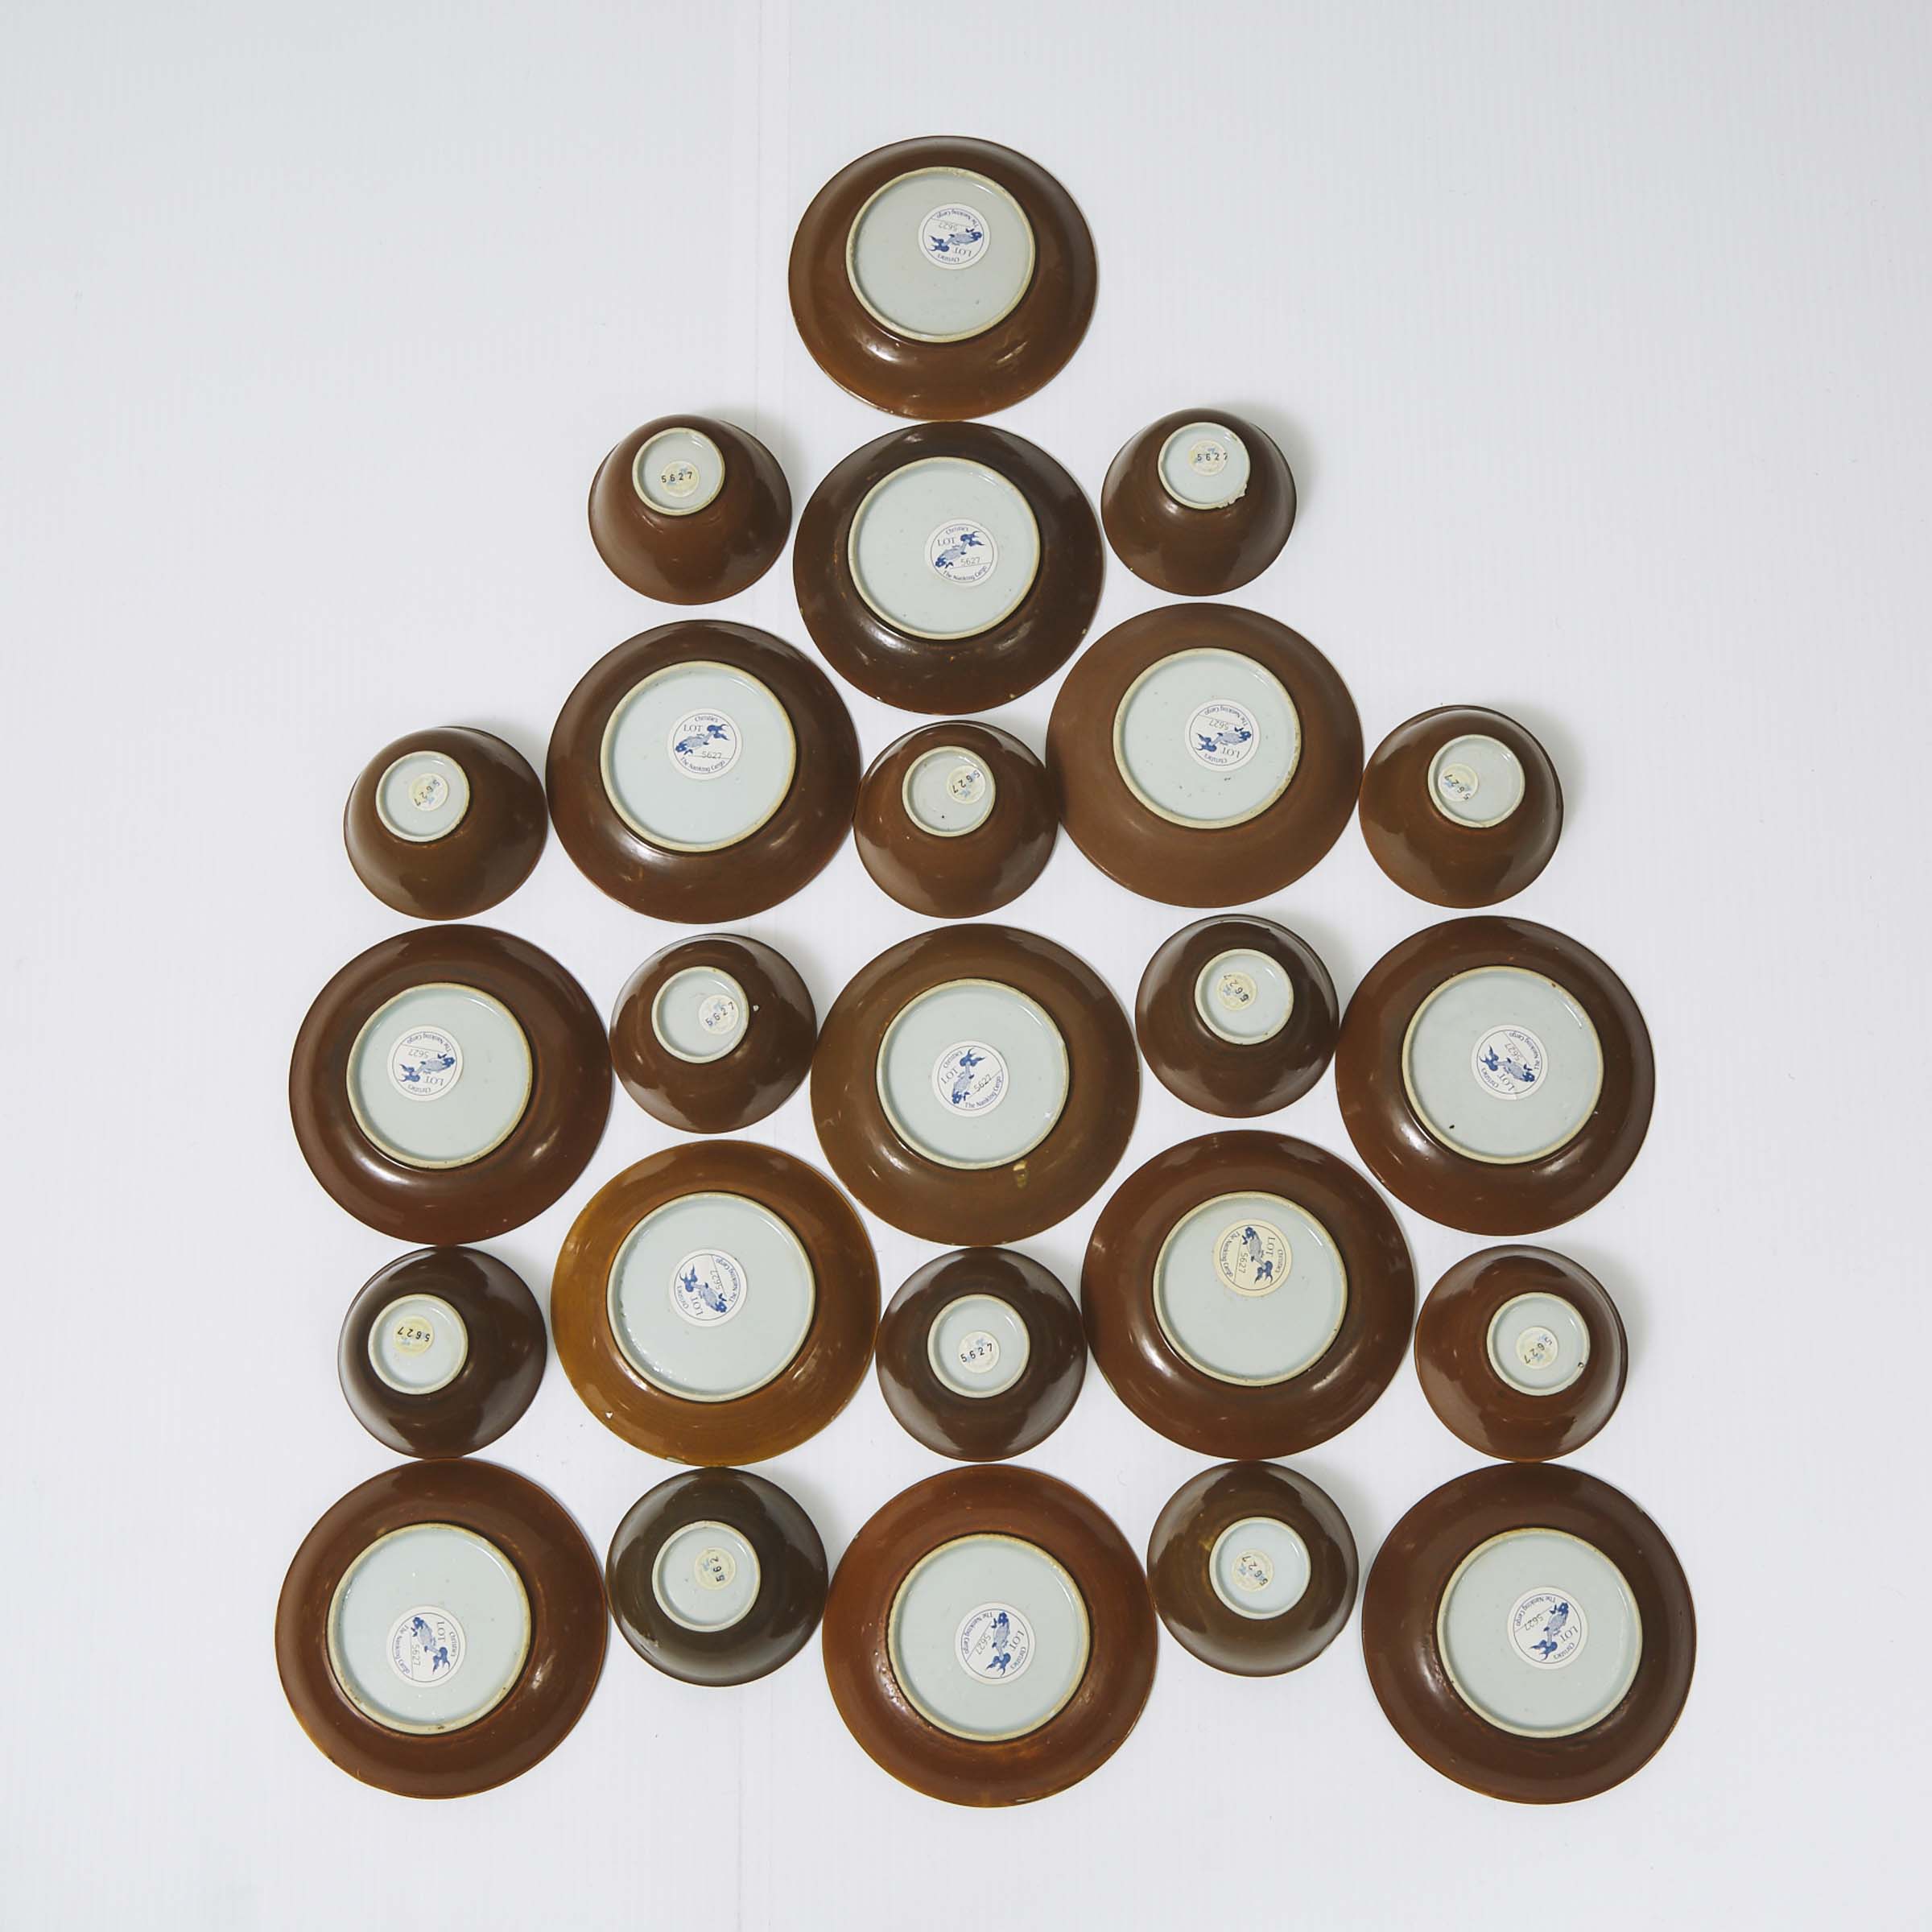 A Set of Twenty-Four 'Batavian Pavilion' Pattern Teabowls and Saucers from the Nanking Cargo, Qianlong Period, Circa 1750